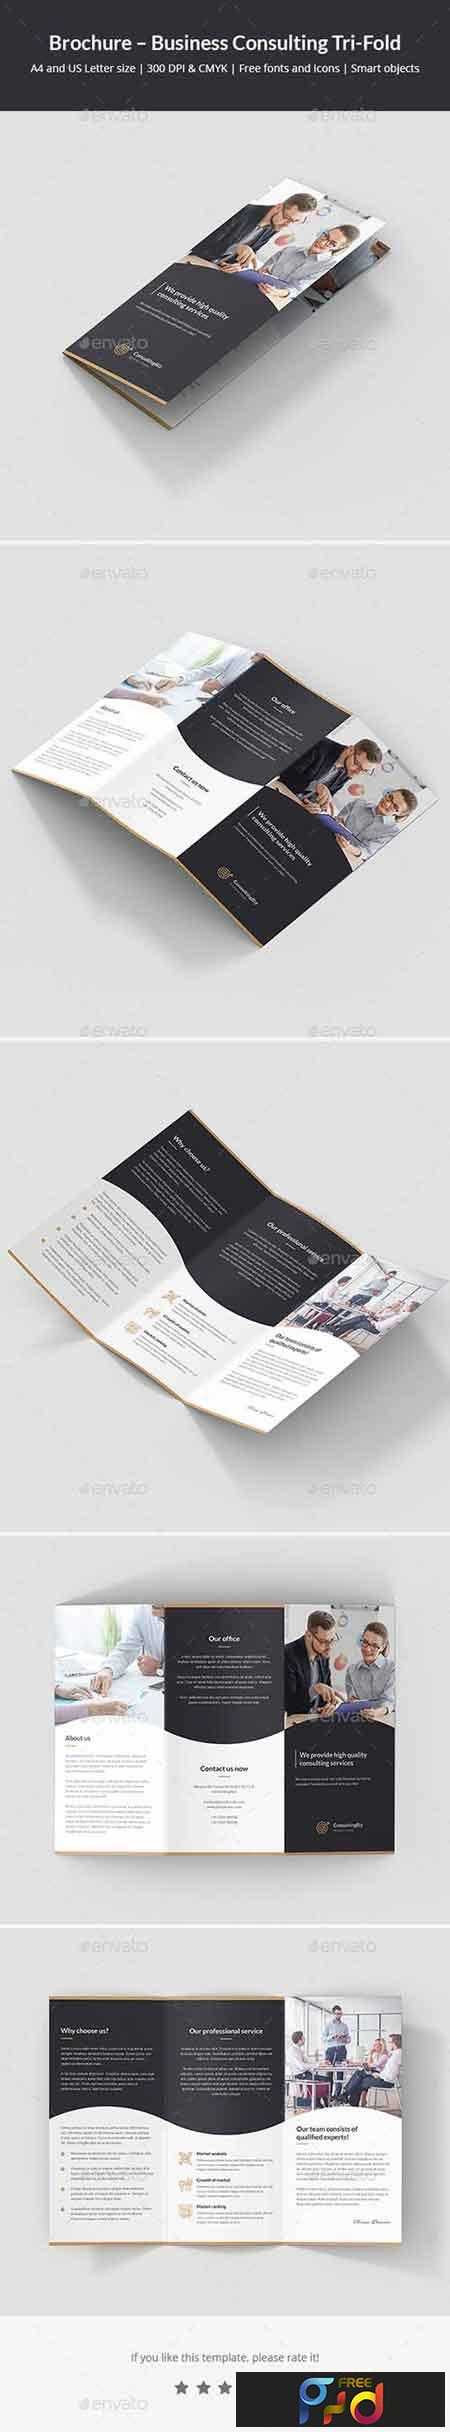 Brochure   Business Consulting Tri-Fold